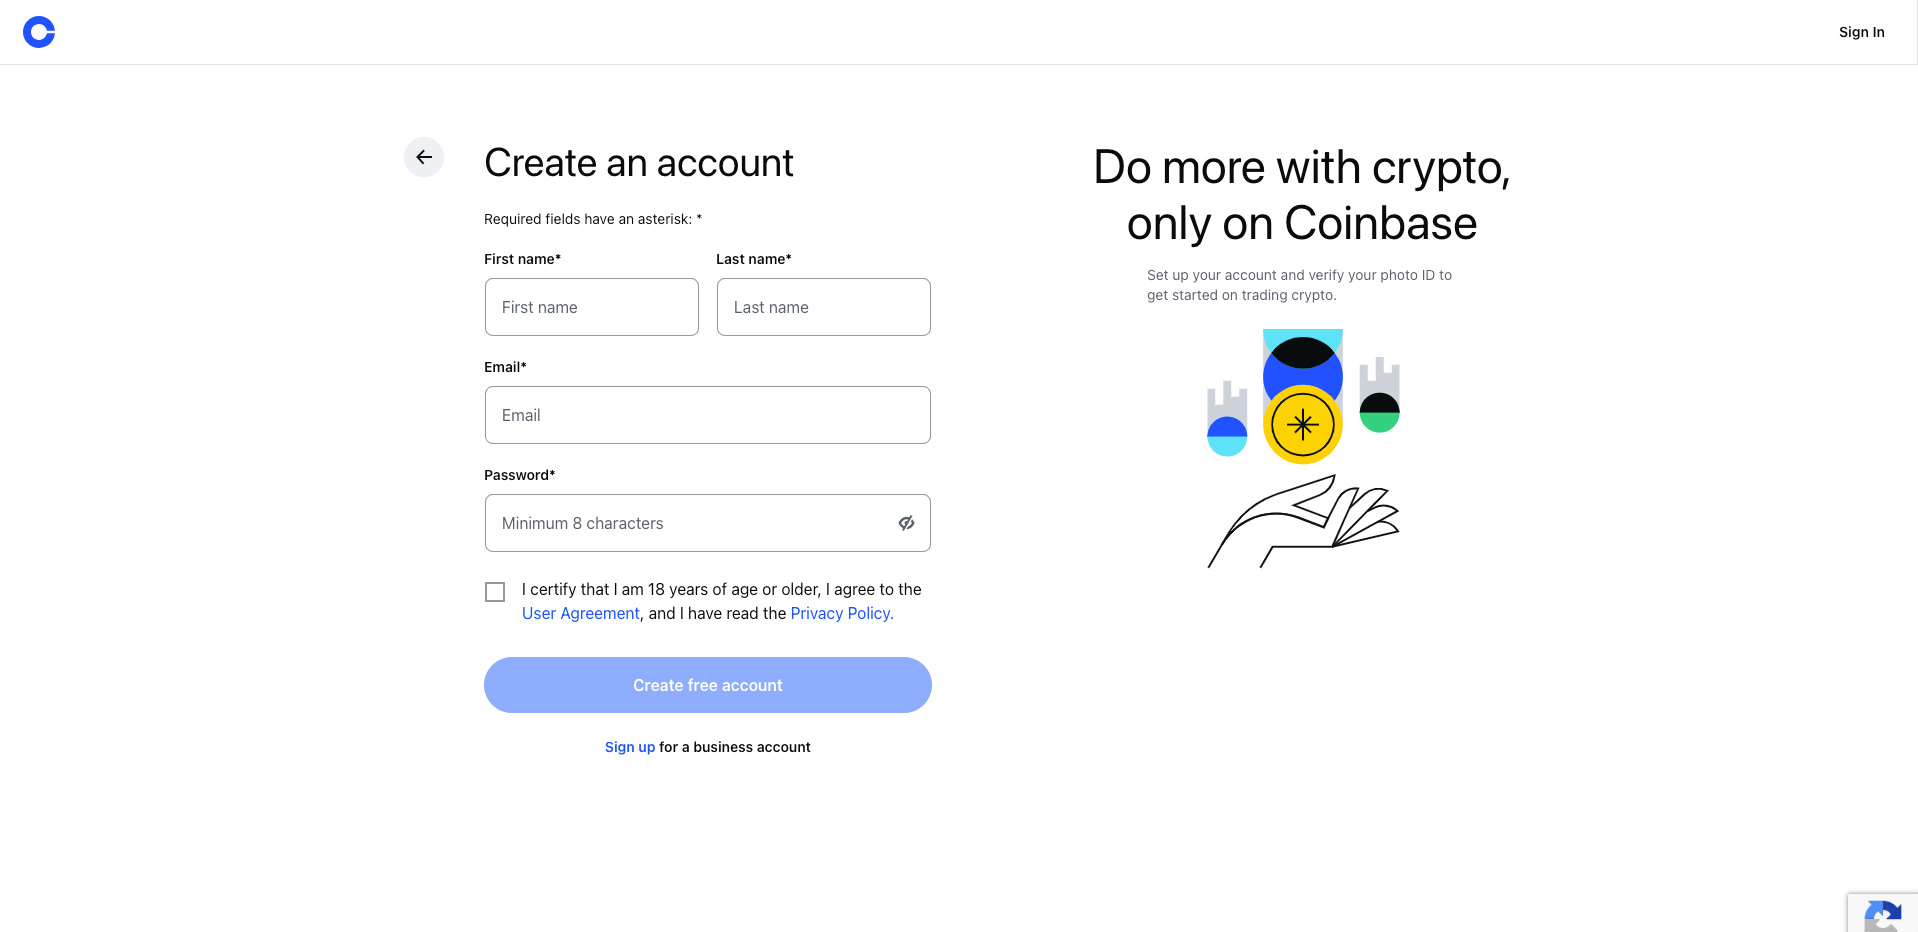 2. Enter your information to create an account;  